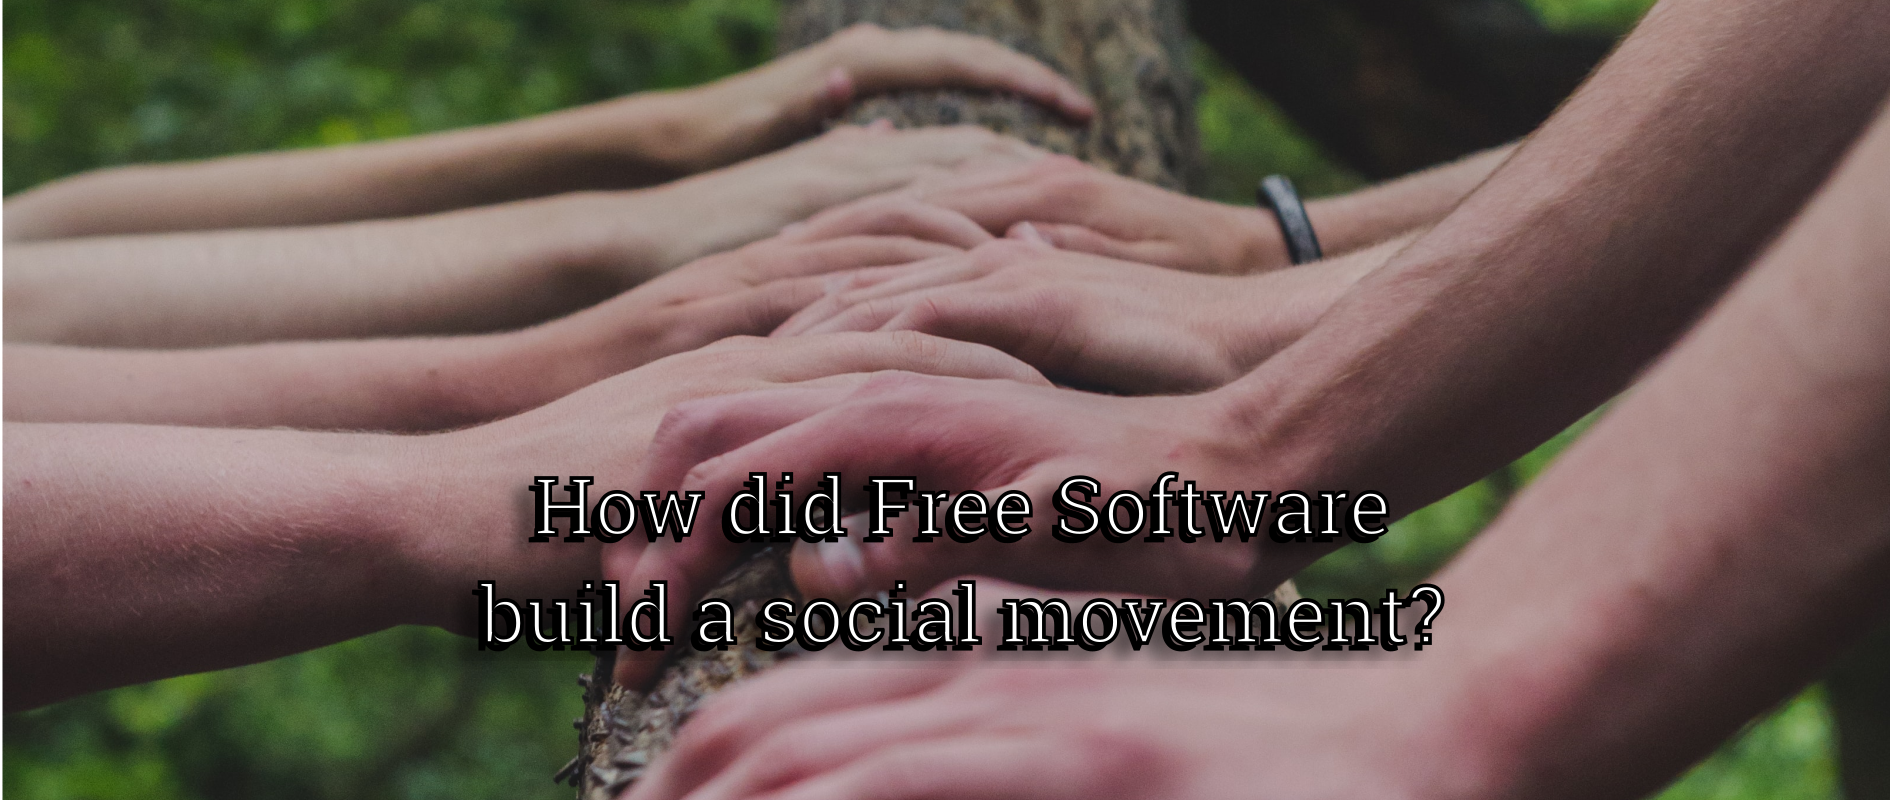 How did Free Software build a social movement?